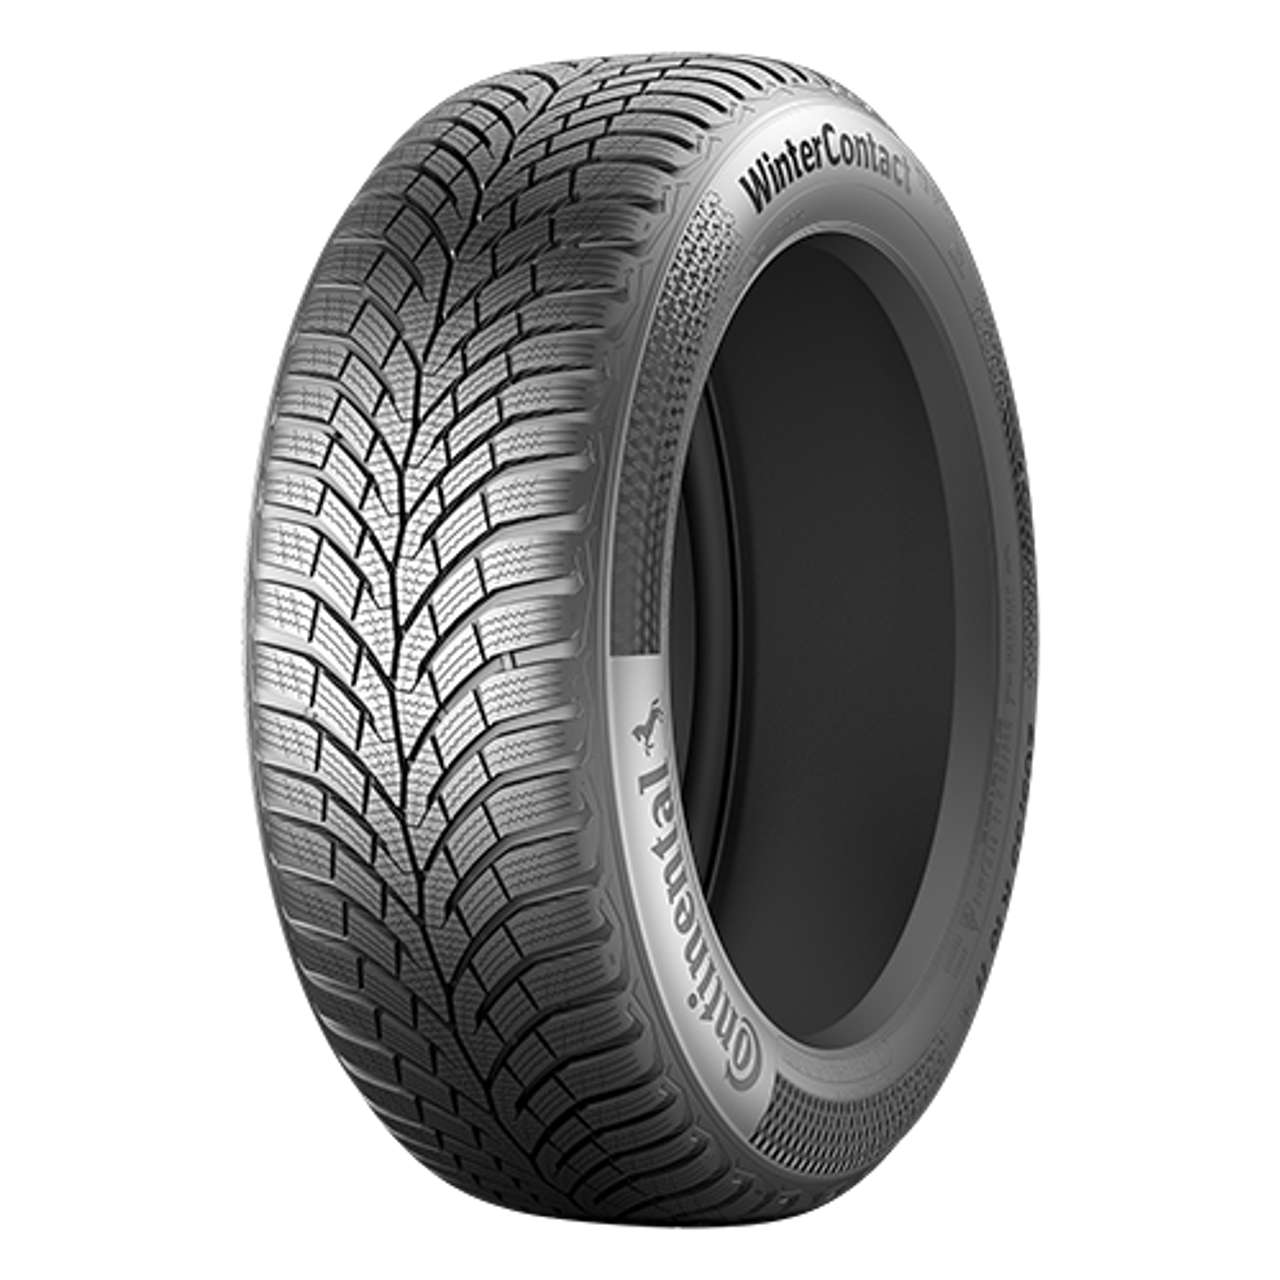 CONTINENTAL WINTERCONTACT TS 870 (EVc) 215/60R16 95H BSW von Continental